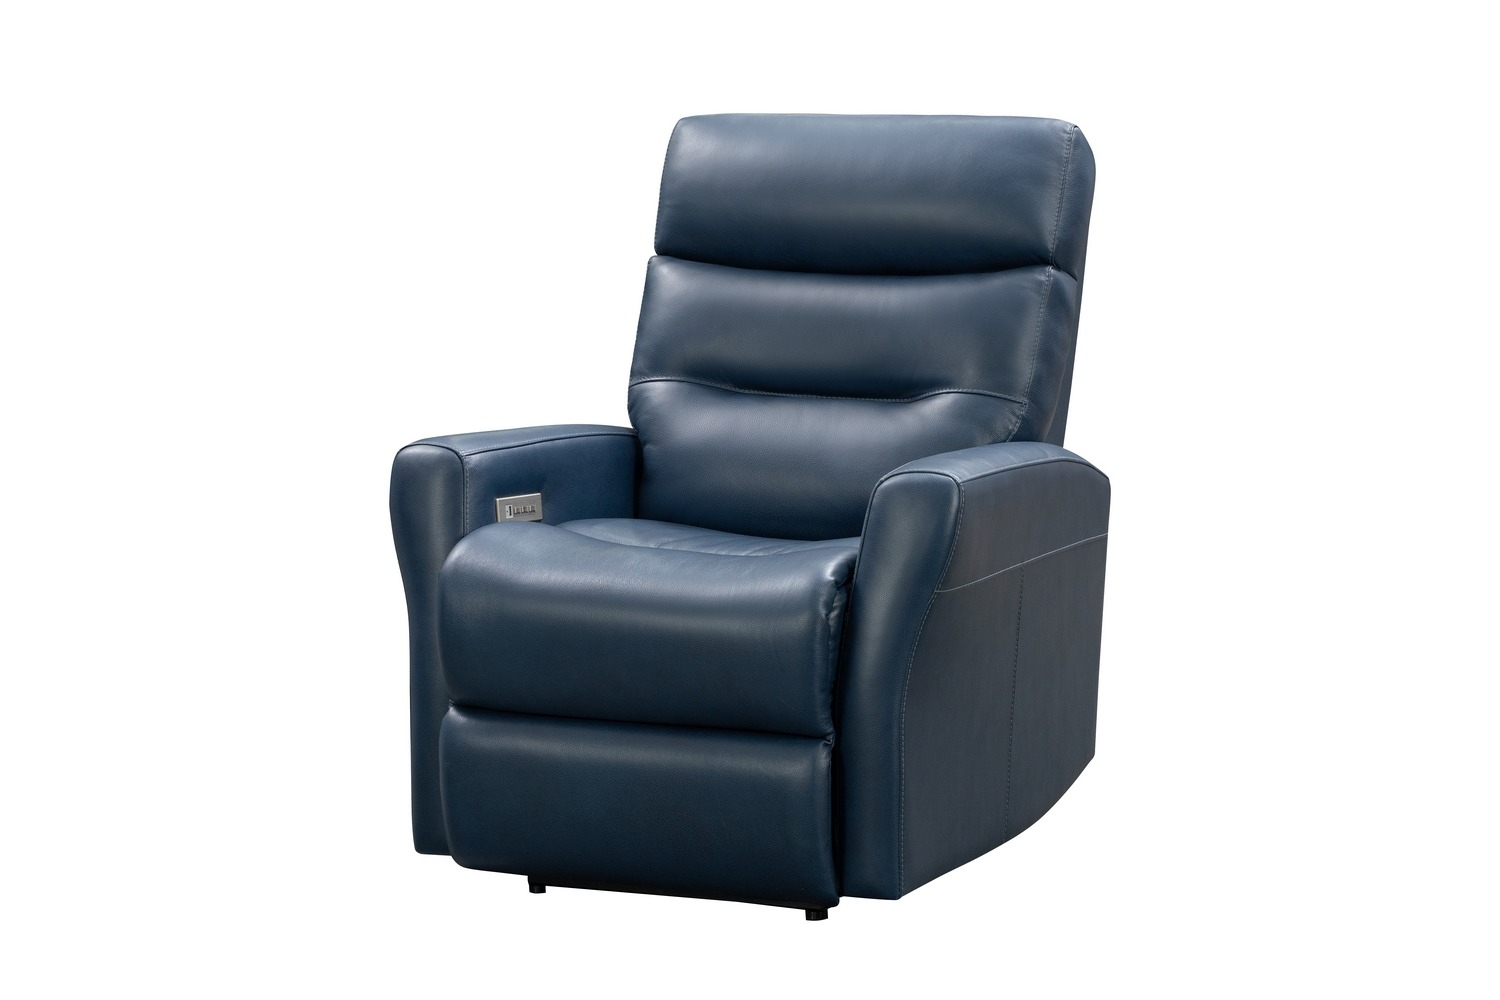 Barcalounger Enzo Power Recliner Chair with Power Head Rest and Power Lumbar - Marco Navy Blue/Leather Match